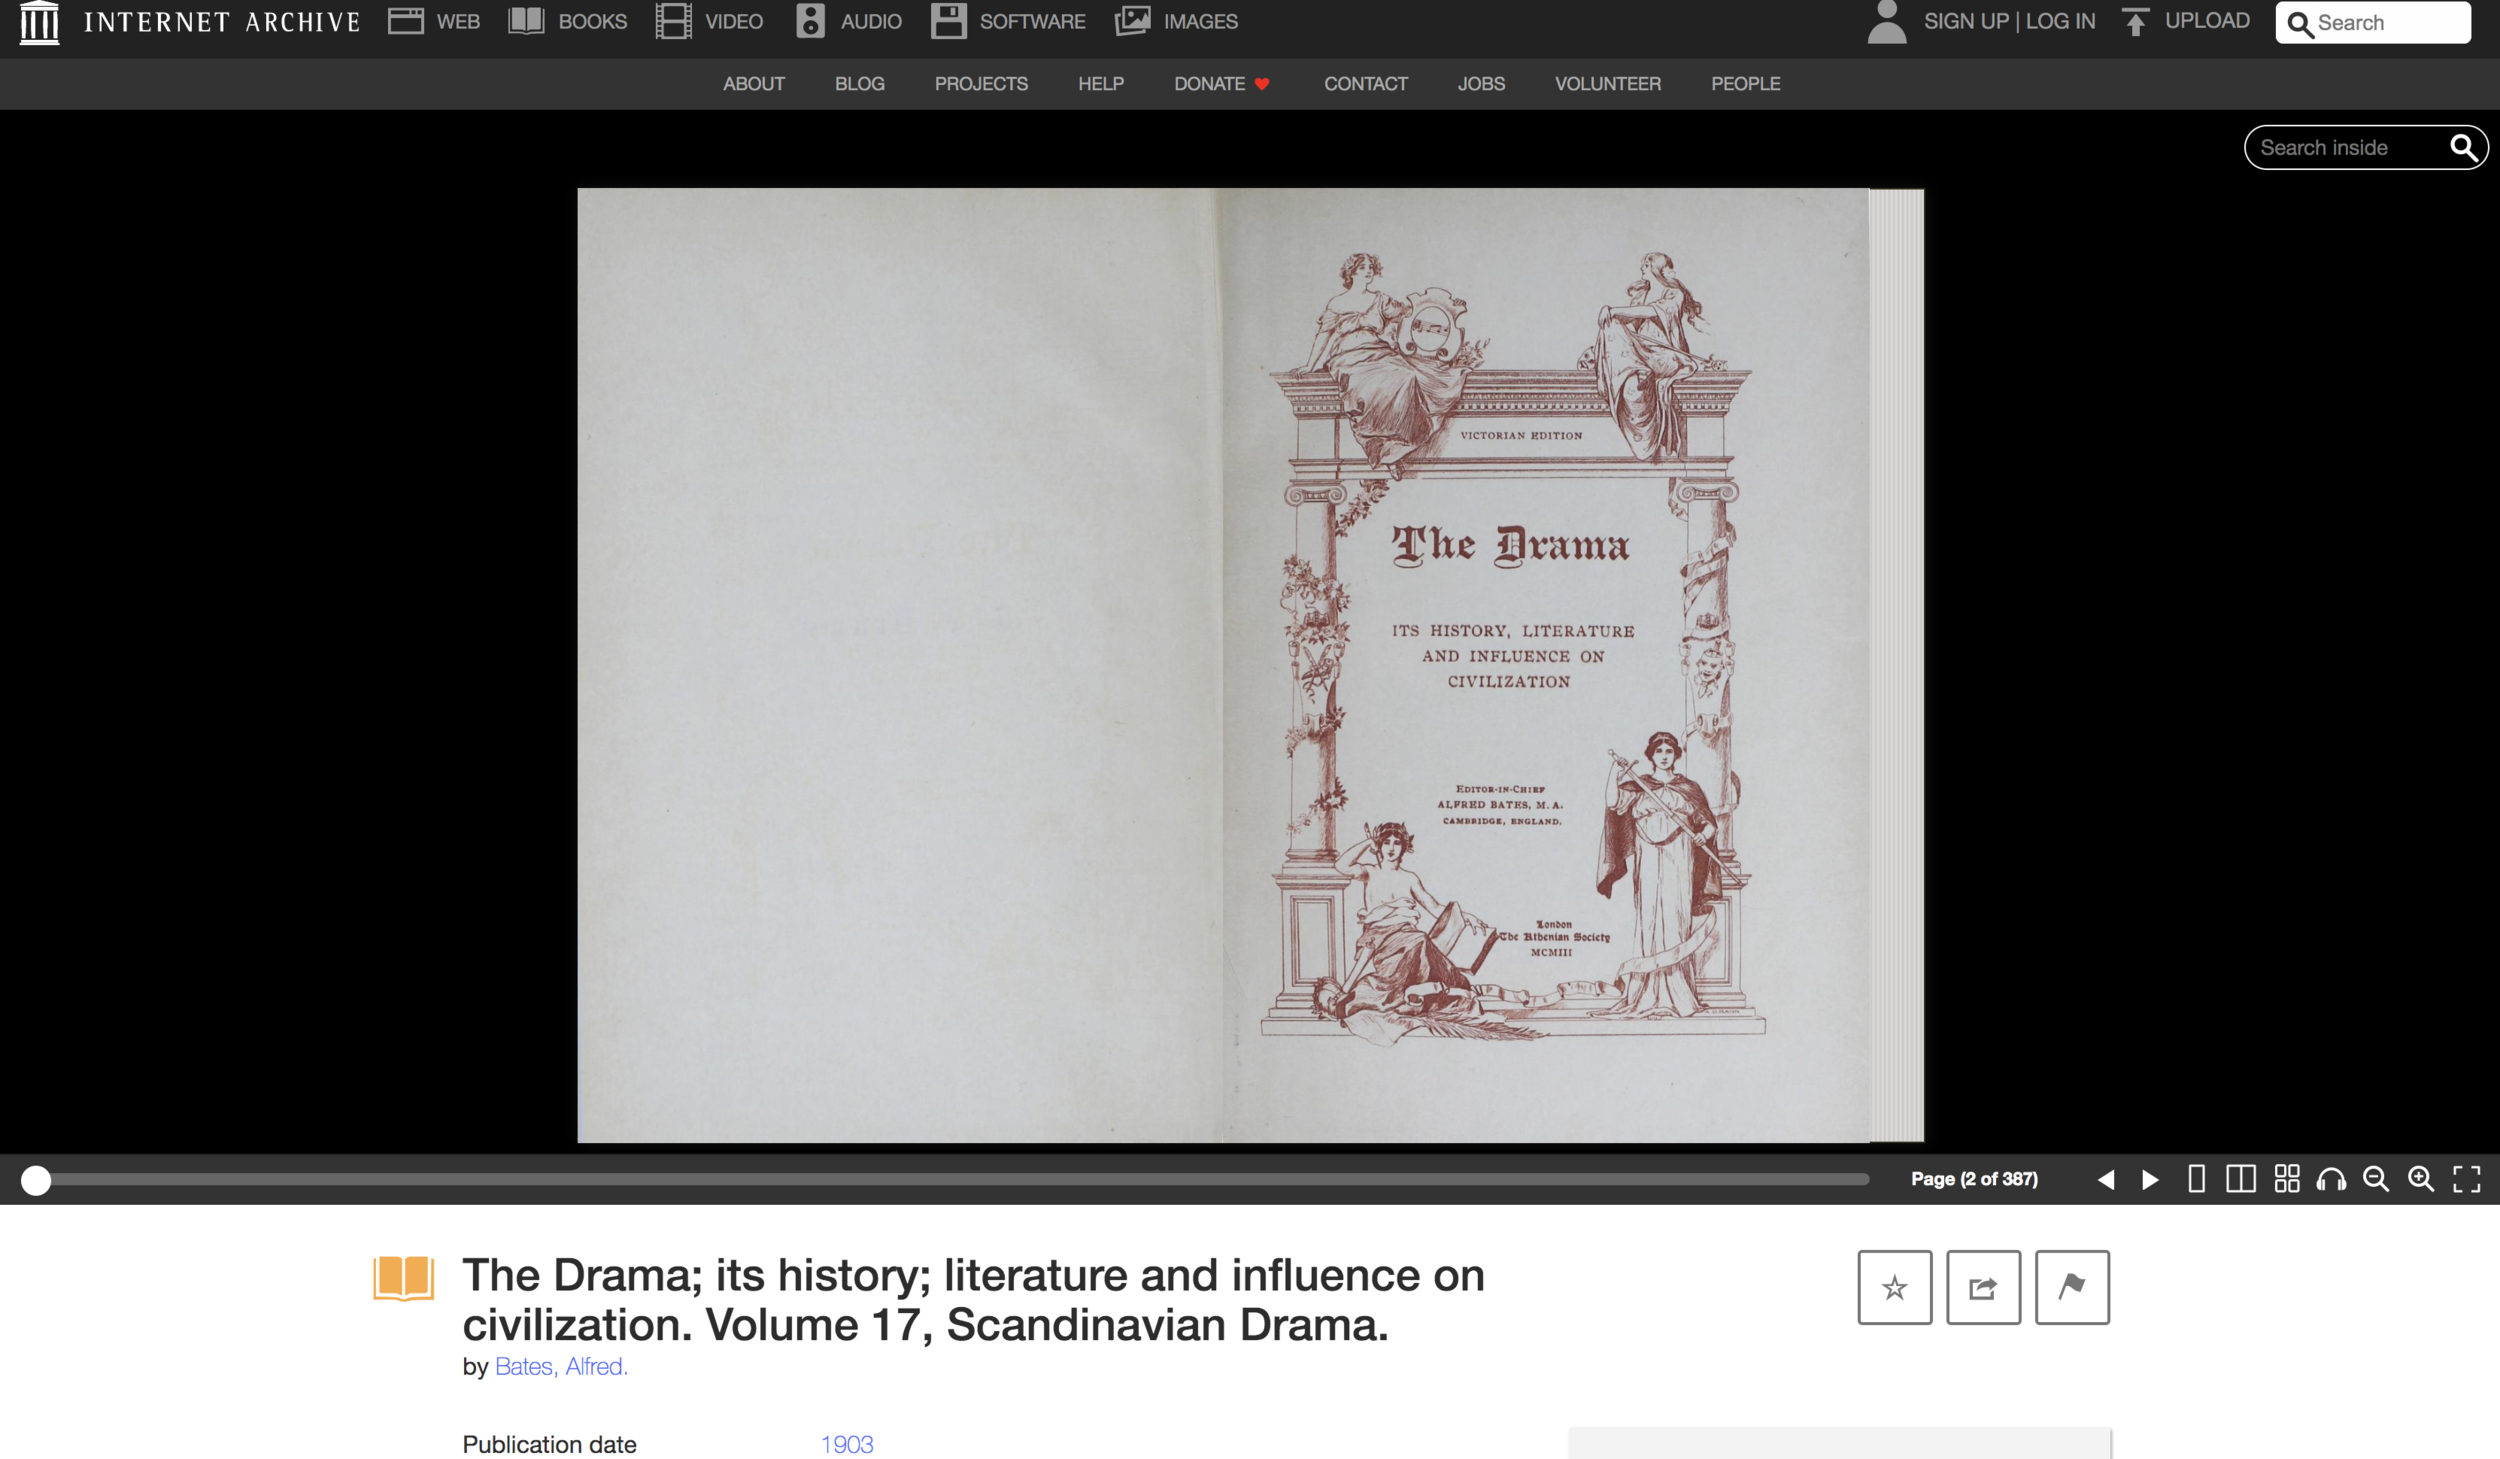   Two-page view of the    e-book in the Internet Archive   .  